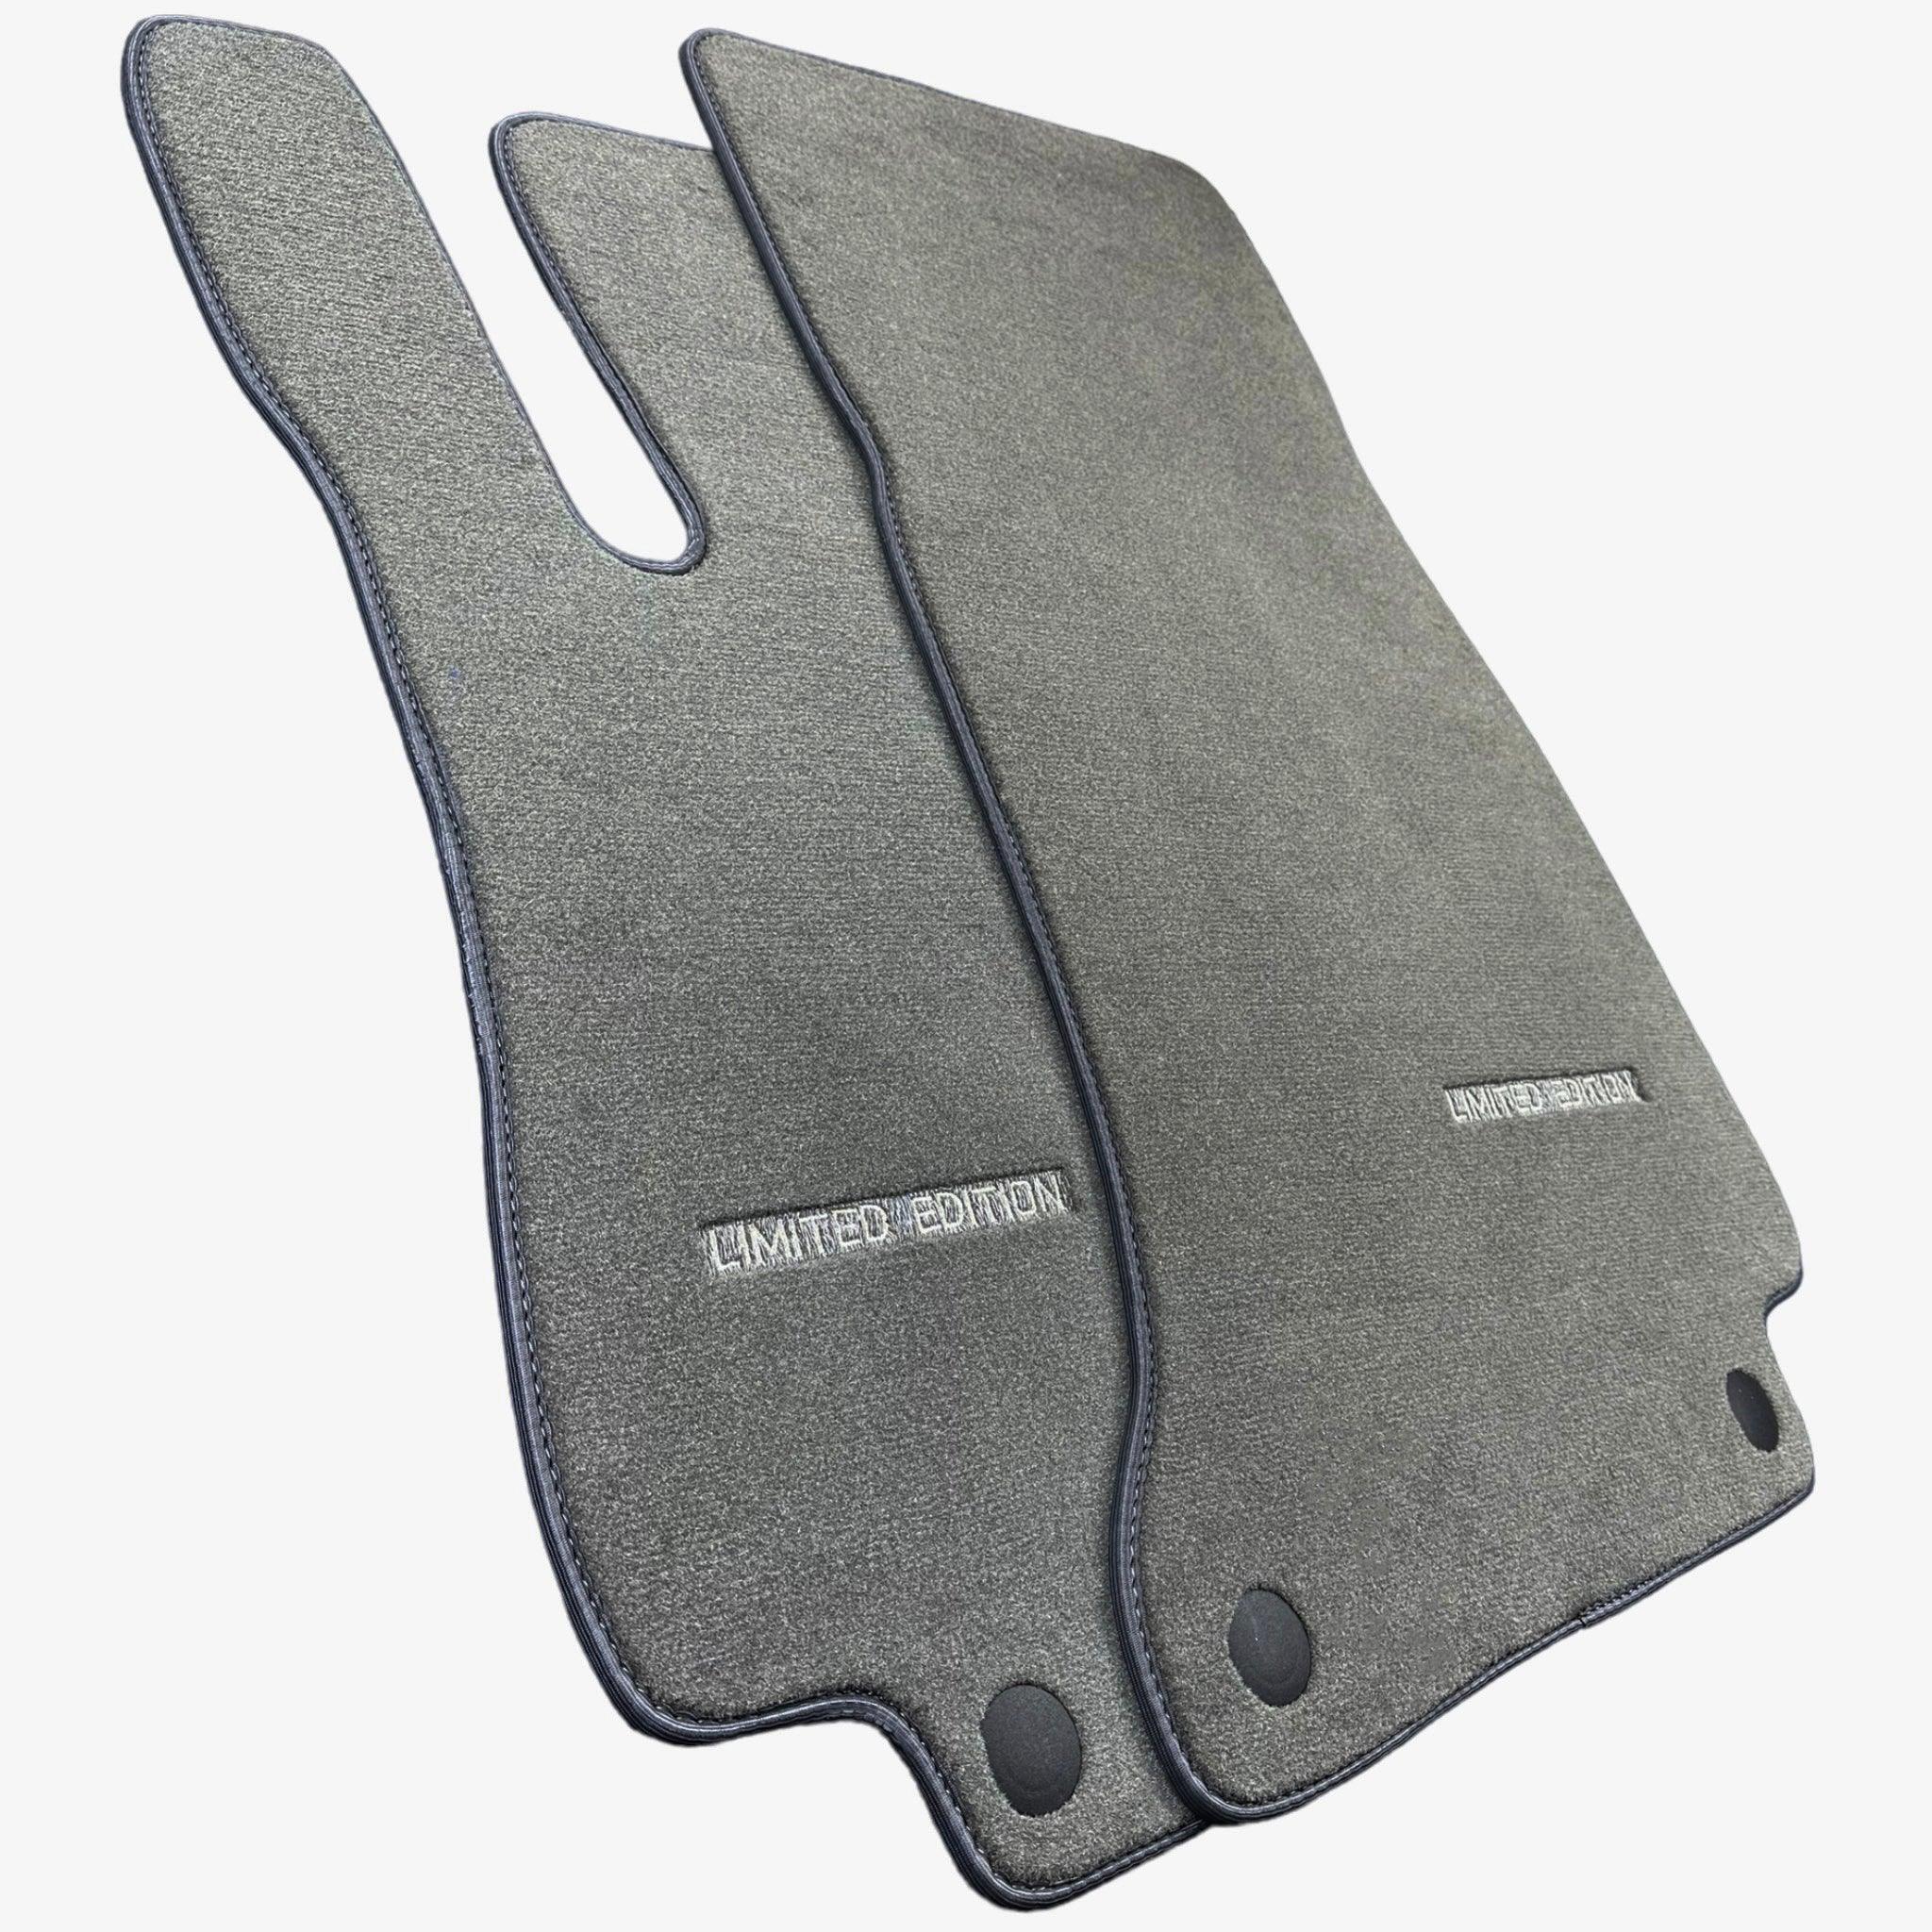 Gray Floor Mats For Mercedes Benz GLA-Class H247 (2020-2023) | Limited Edition